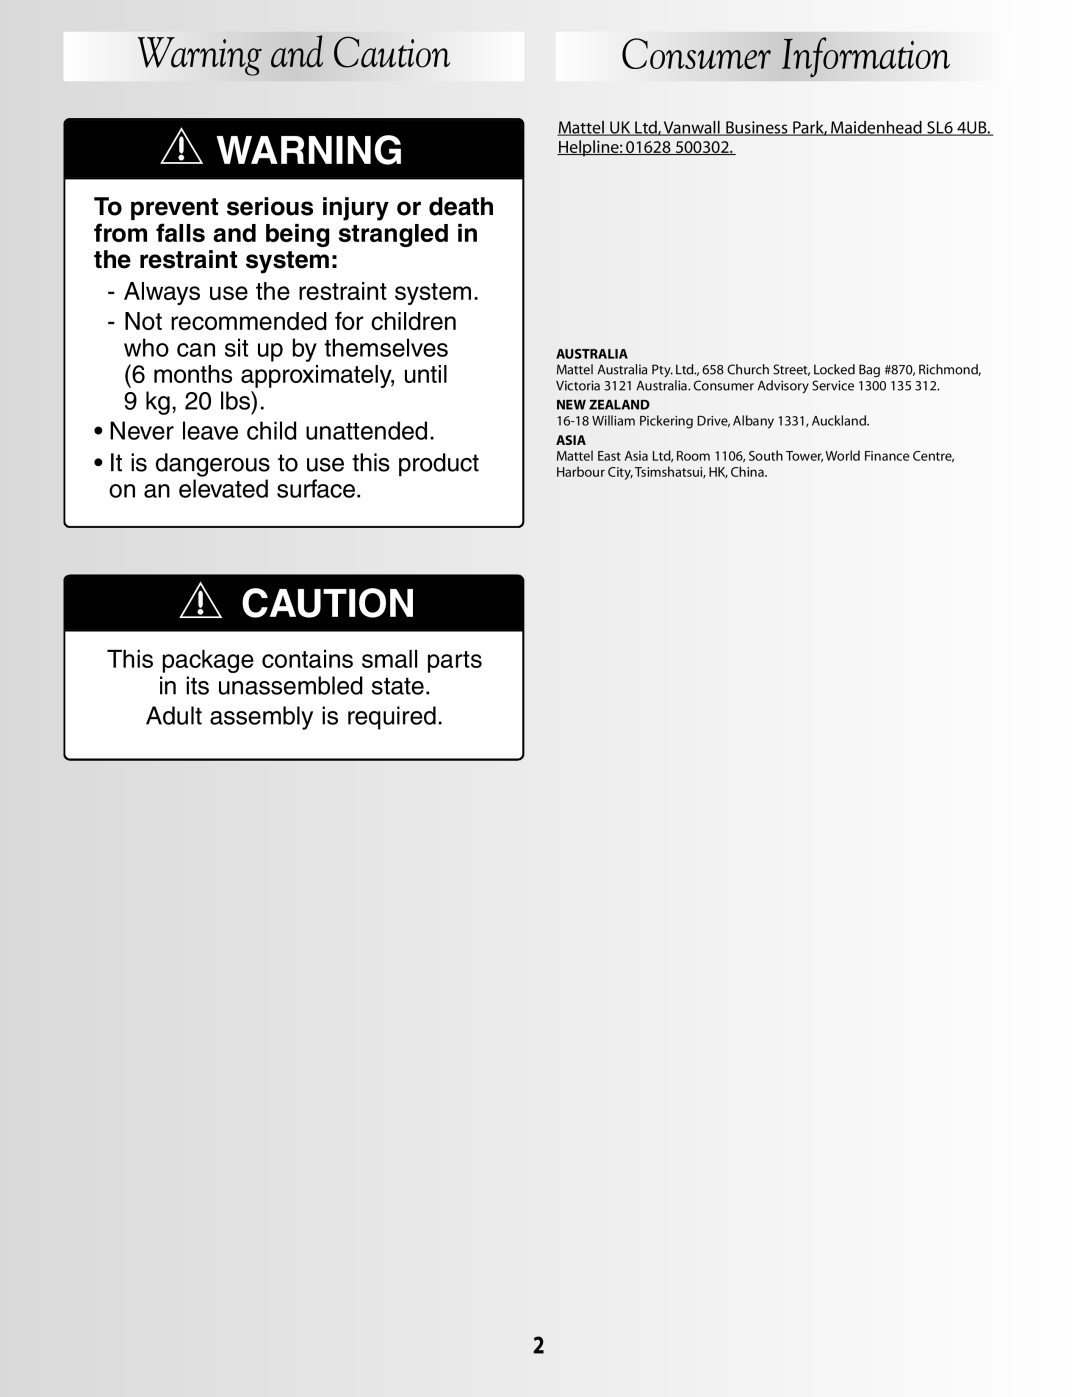 Fisher-Price G5912 manual Warning and Caution, Consumer Information 